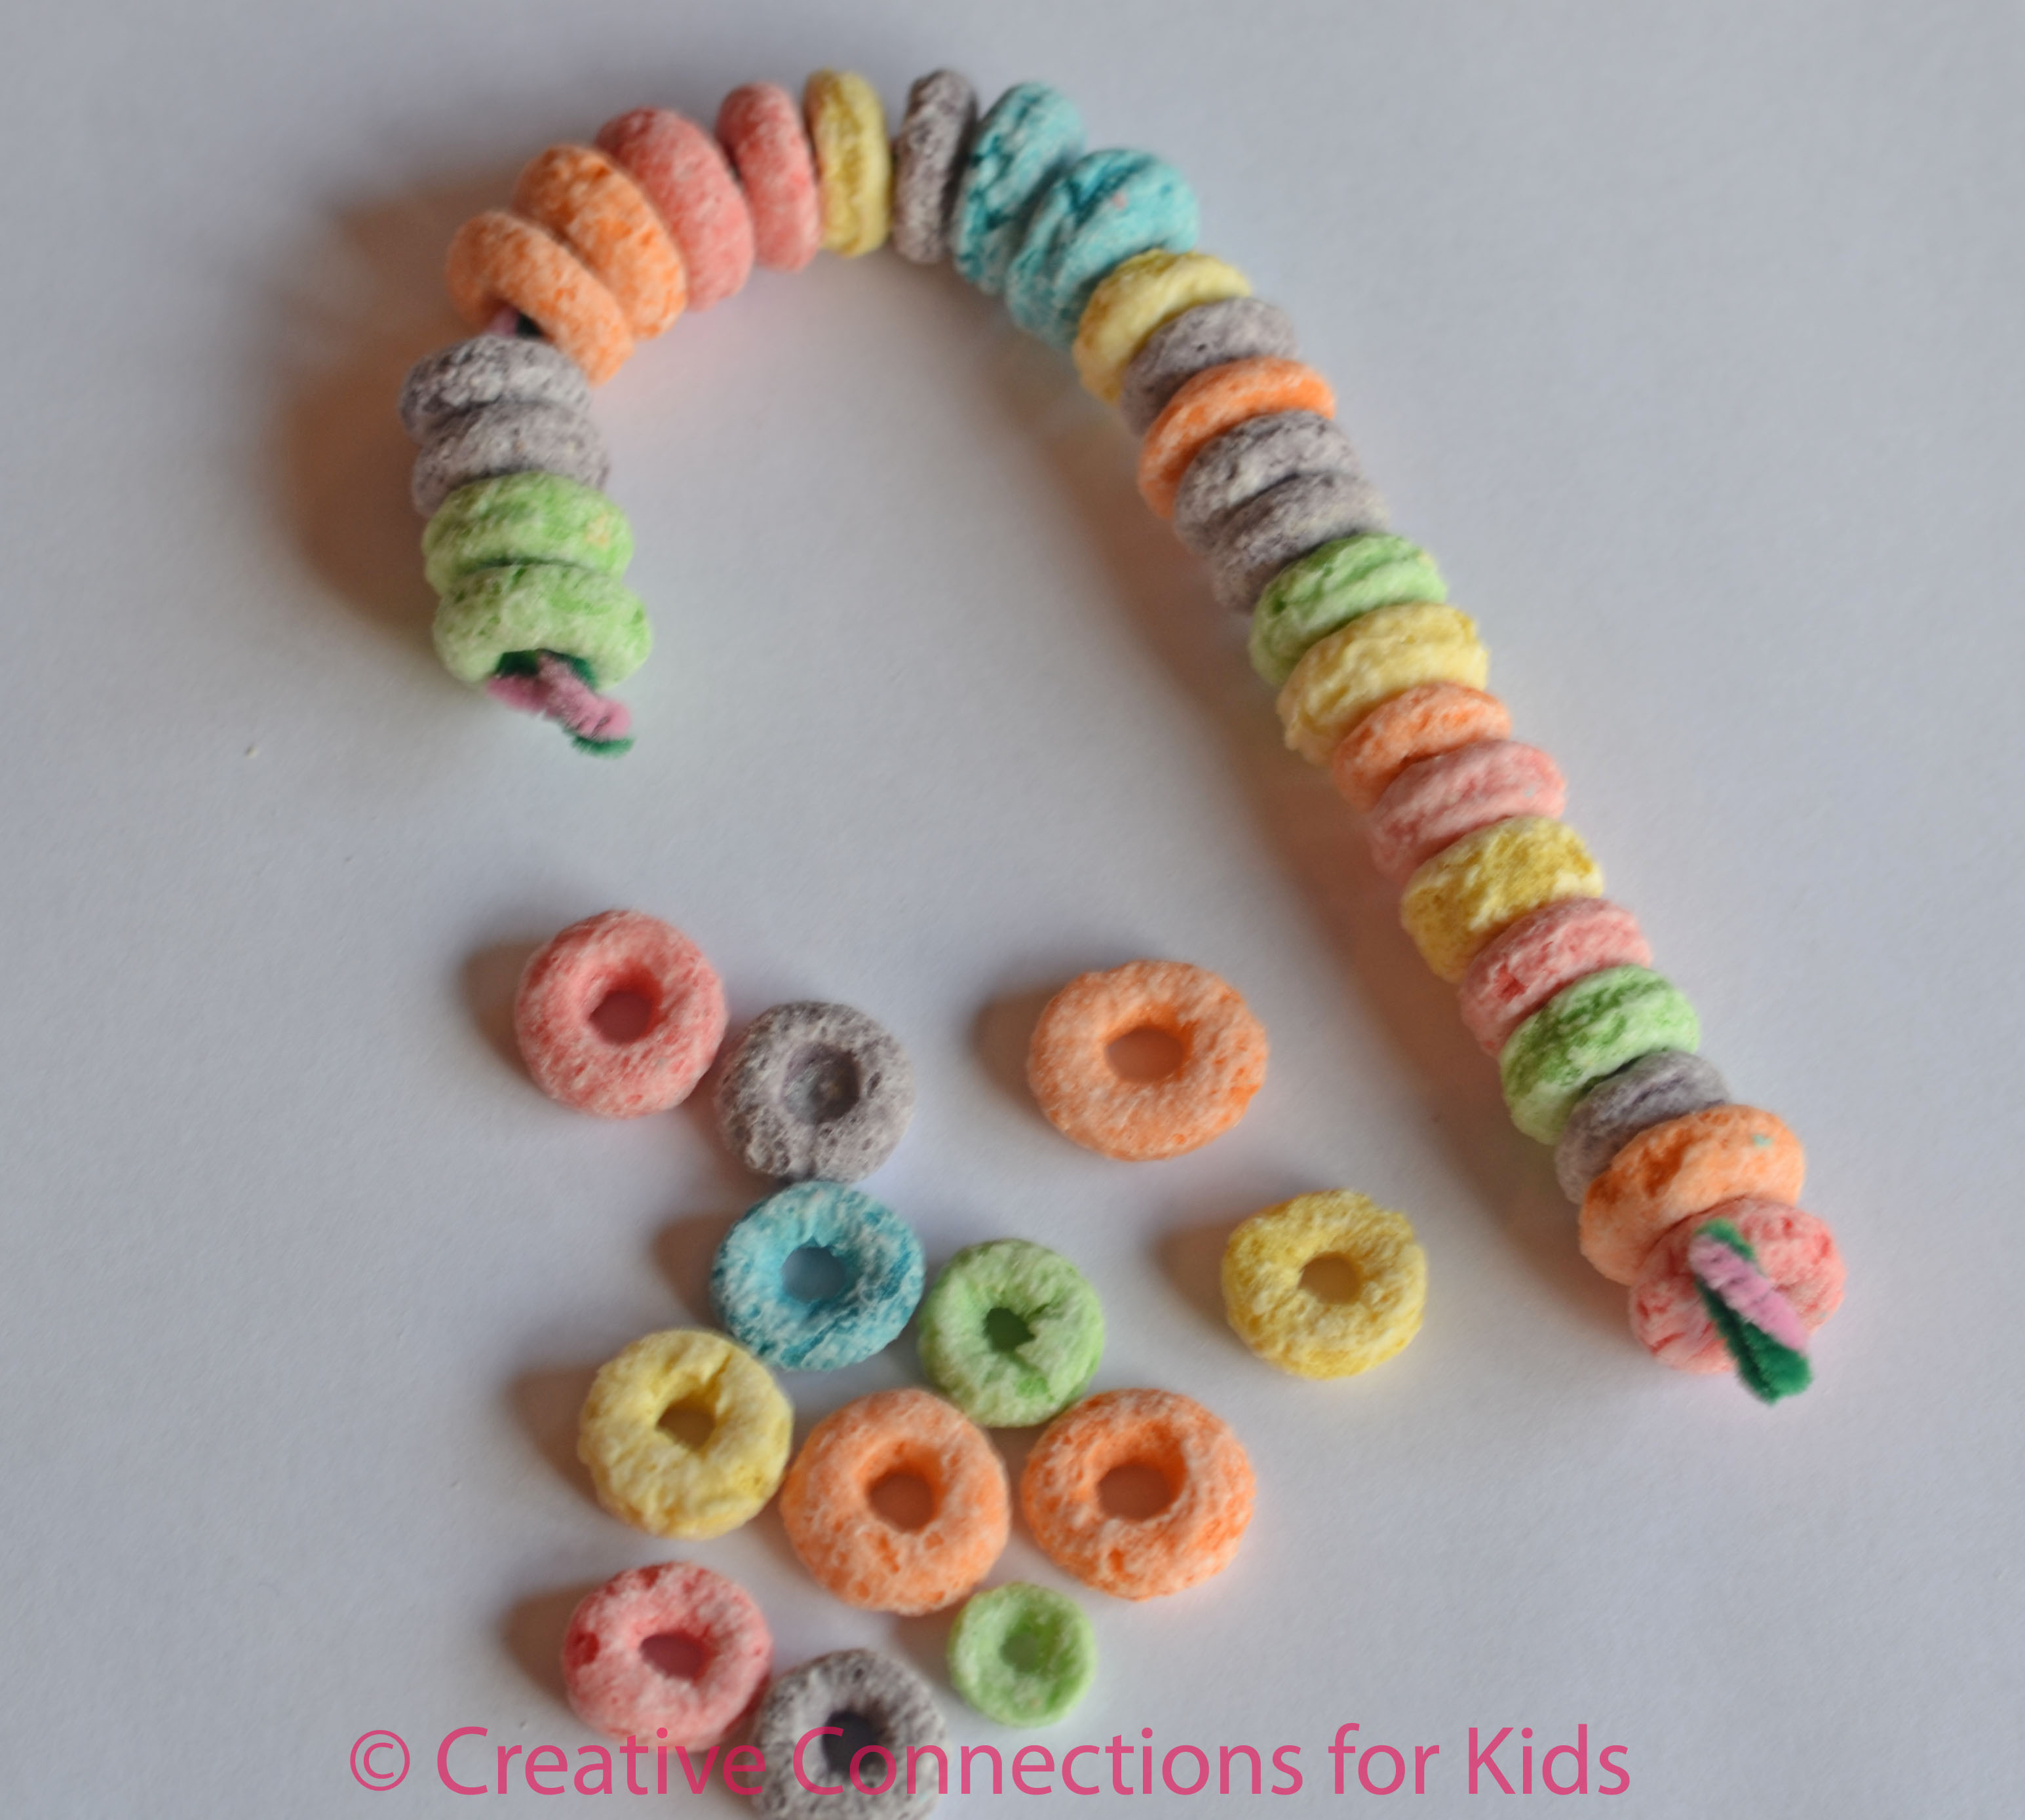 Preschool Crafts for Kids*: Christmas Fruit Loops Candy Cane Craft.